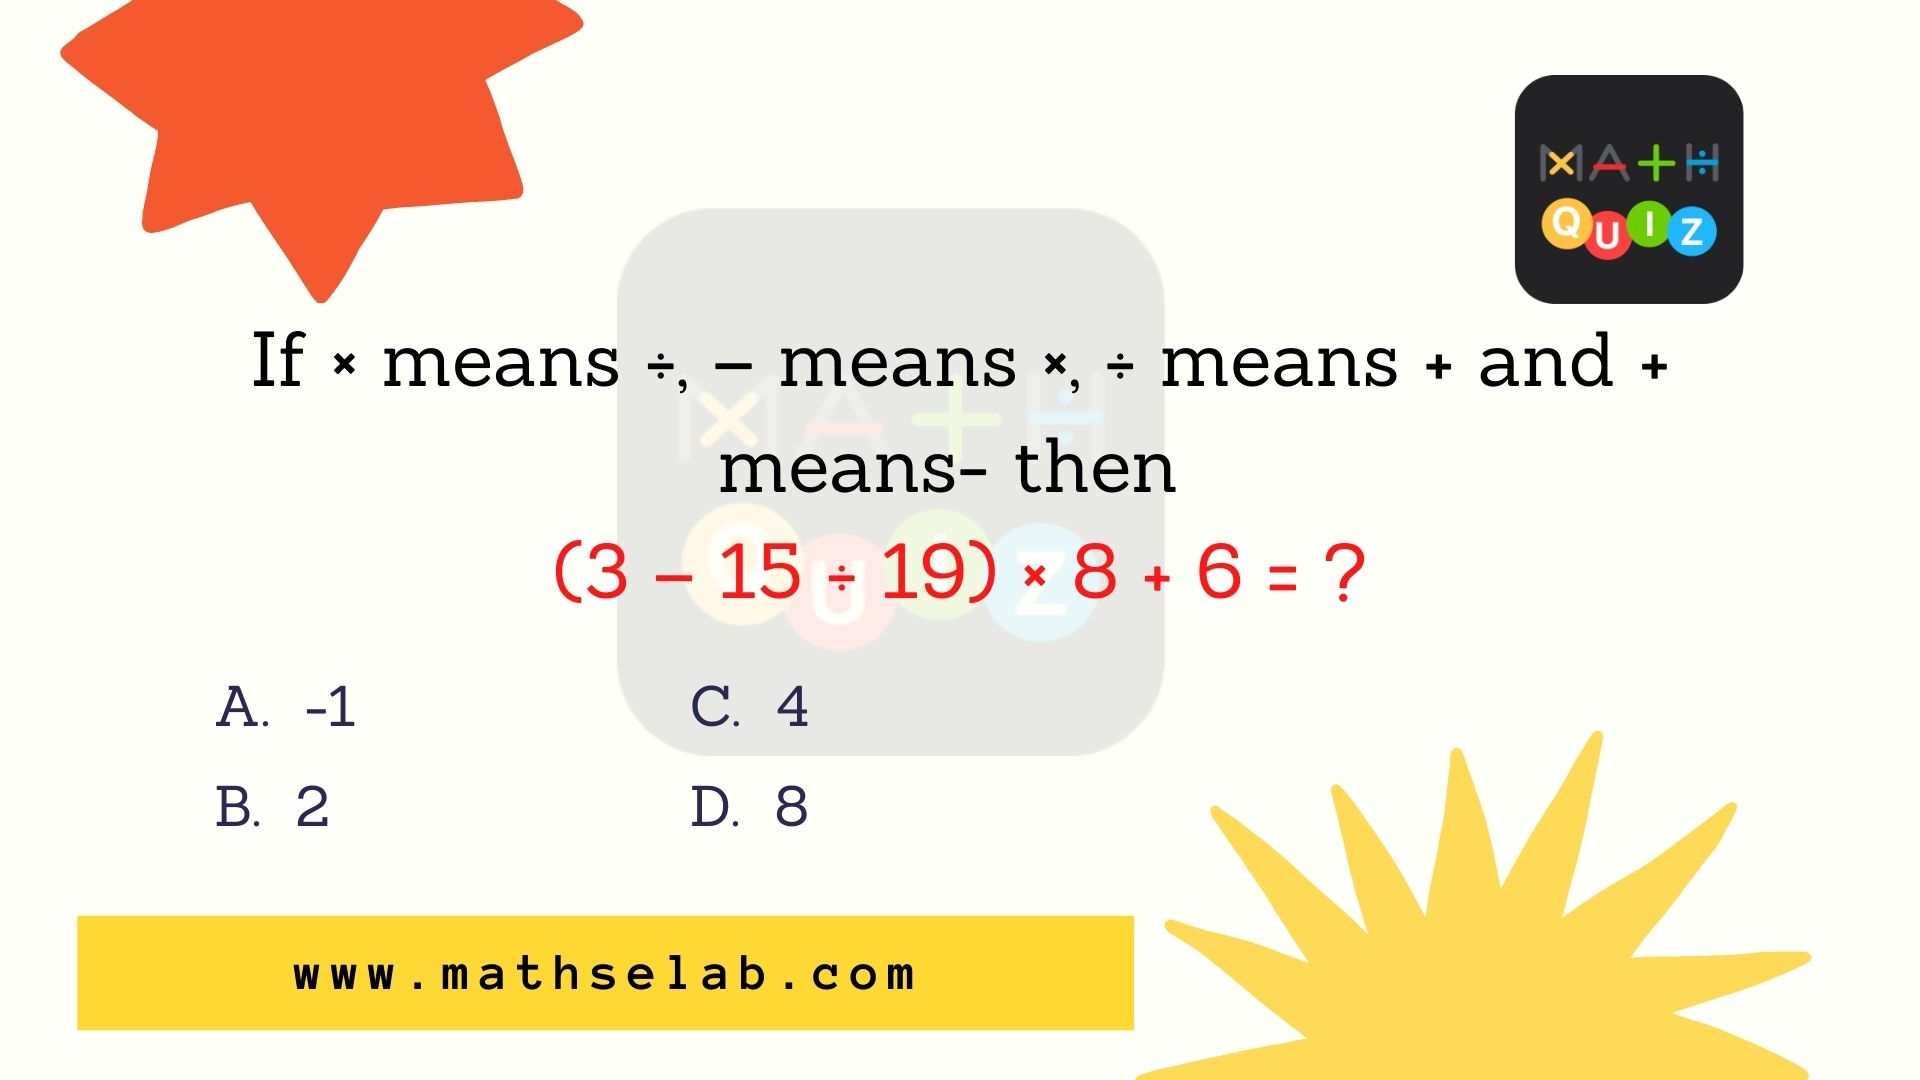 If × means ÷, – means ×, ÷ means + and + means- then (3 – 15 ÷ 19) × 8 + 6 = ? - mathselab.com